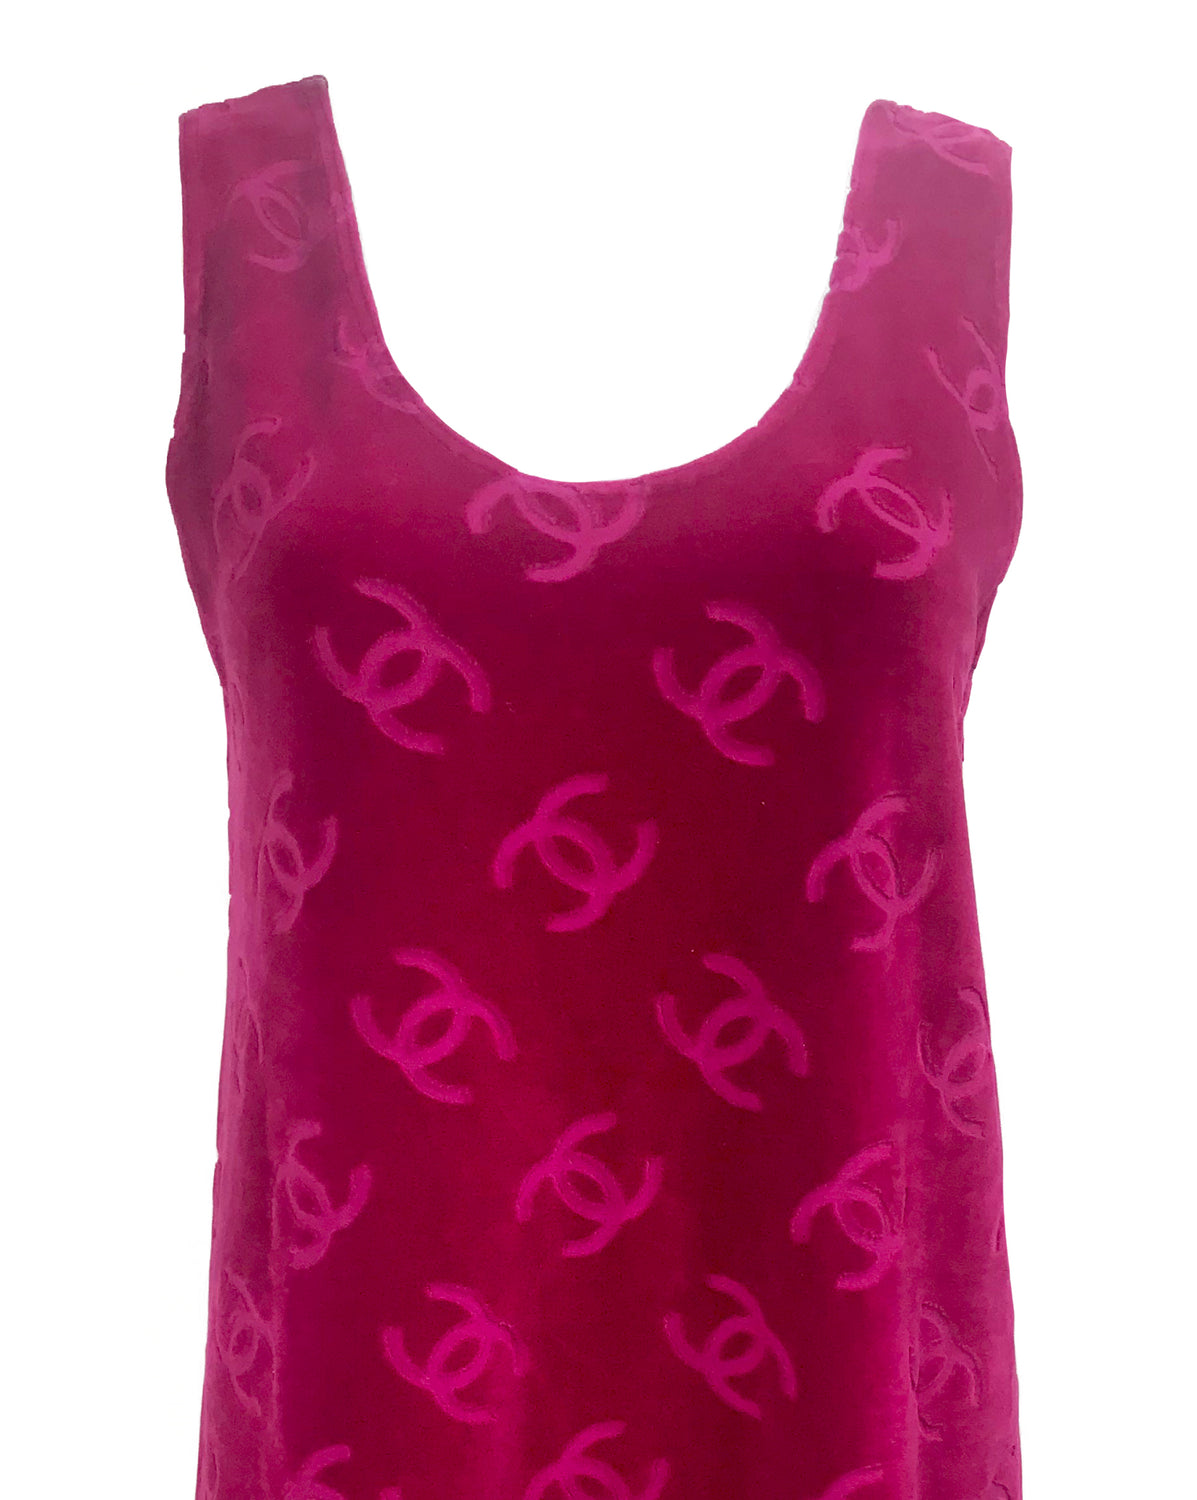 FRUIT Vintage very rare Pink Chanel Logo Velour Tank Dress from the Spring Summer 1996 collection as worn by Kylie Jenner.